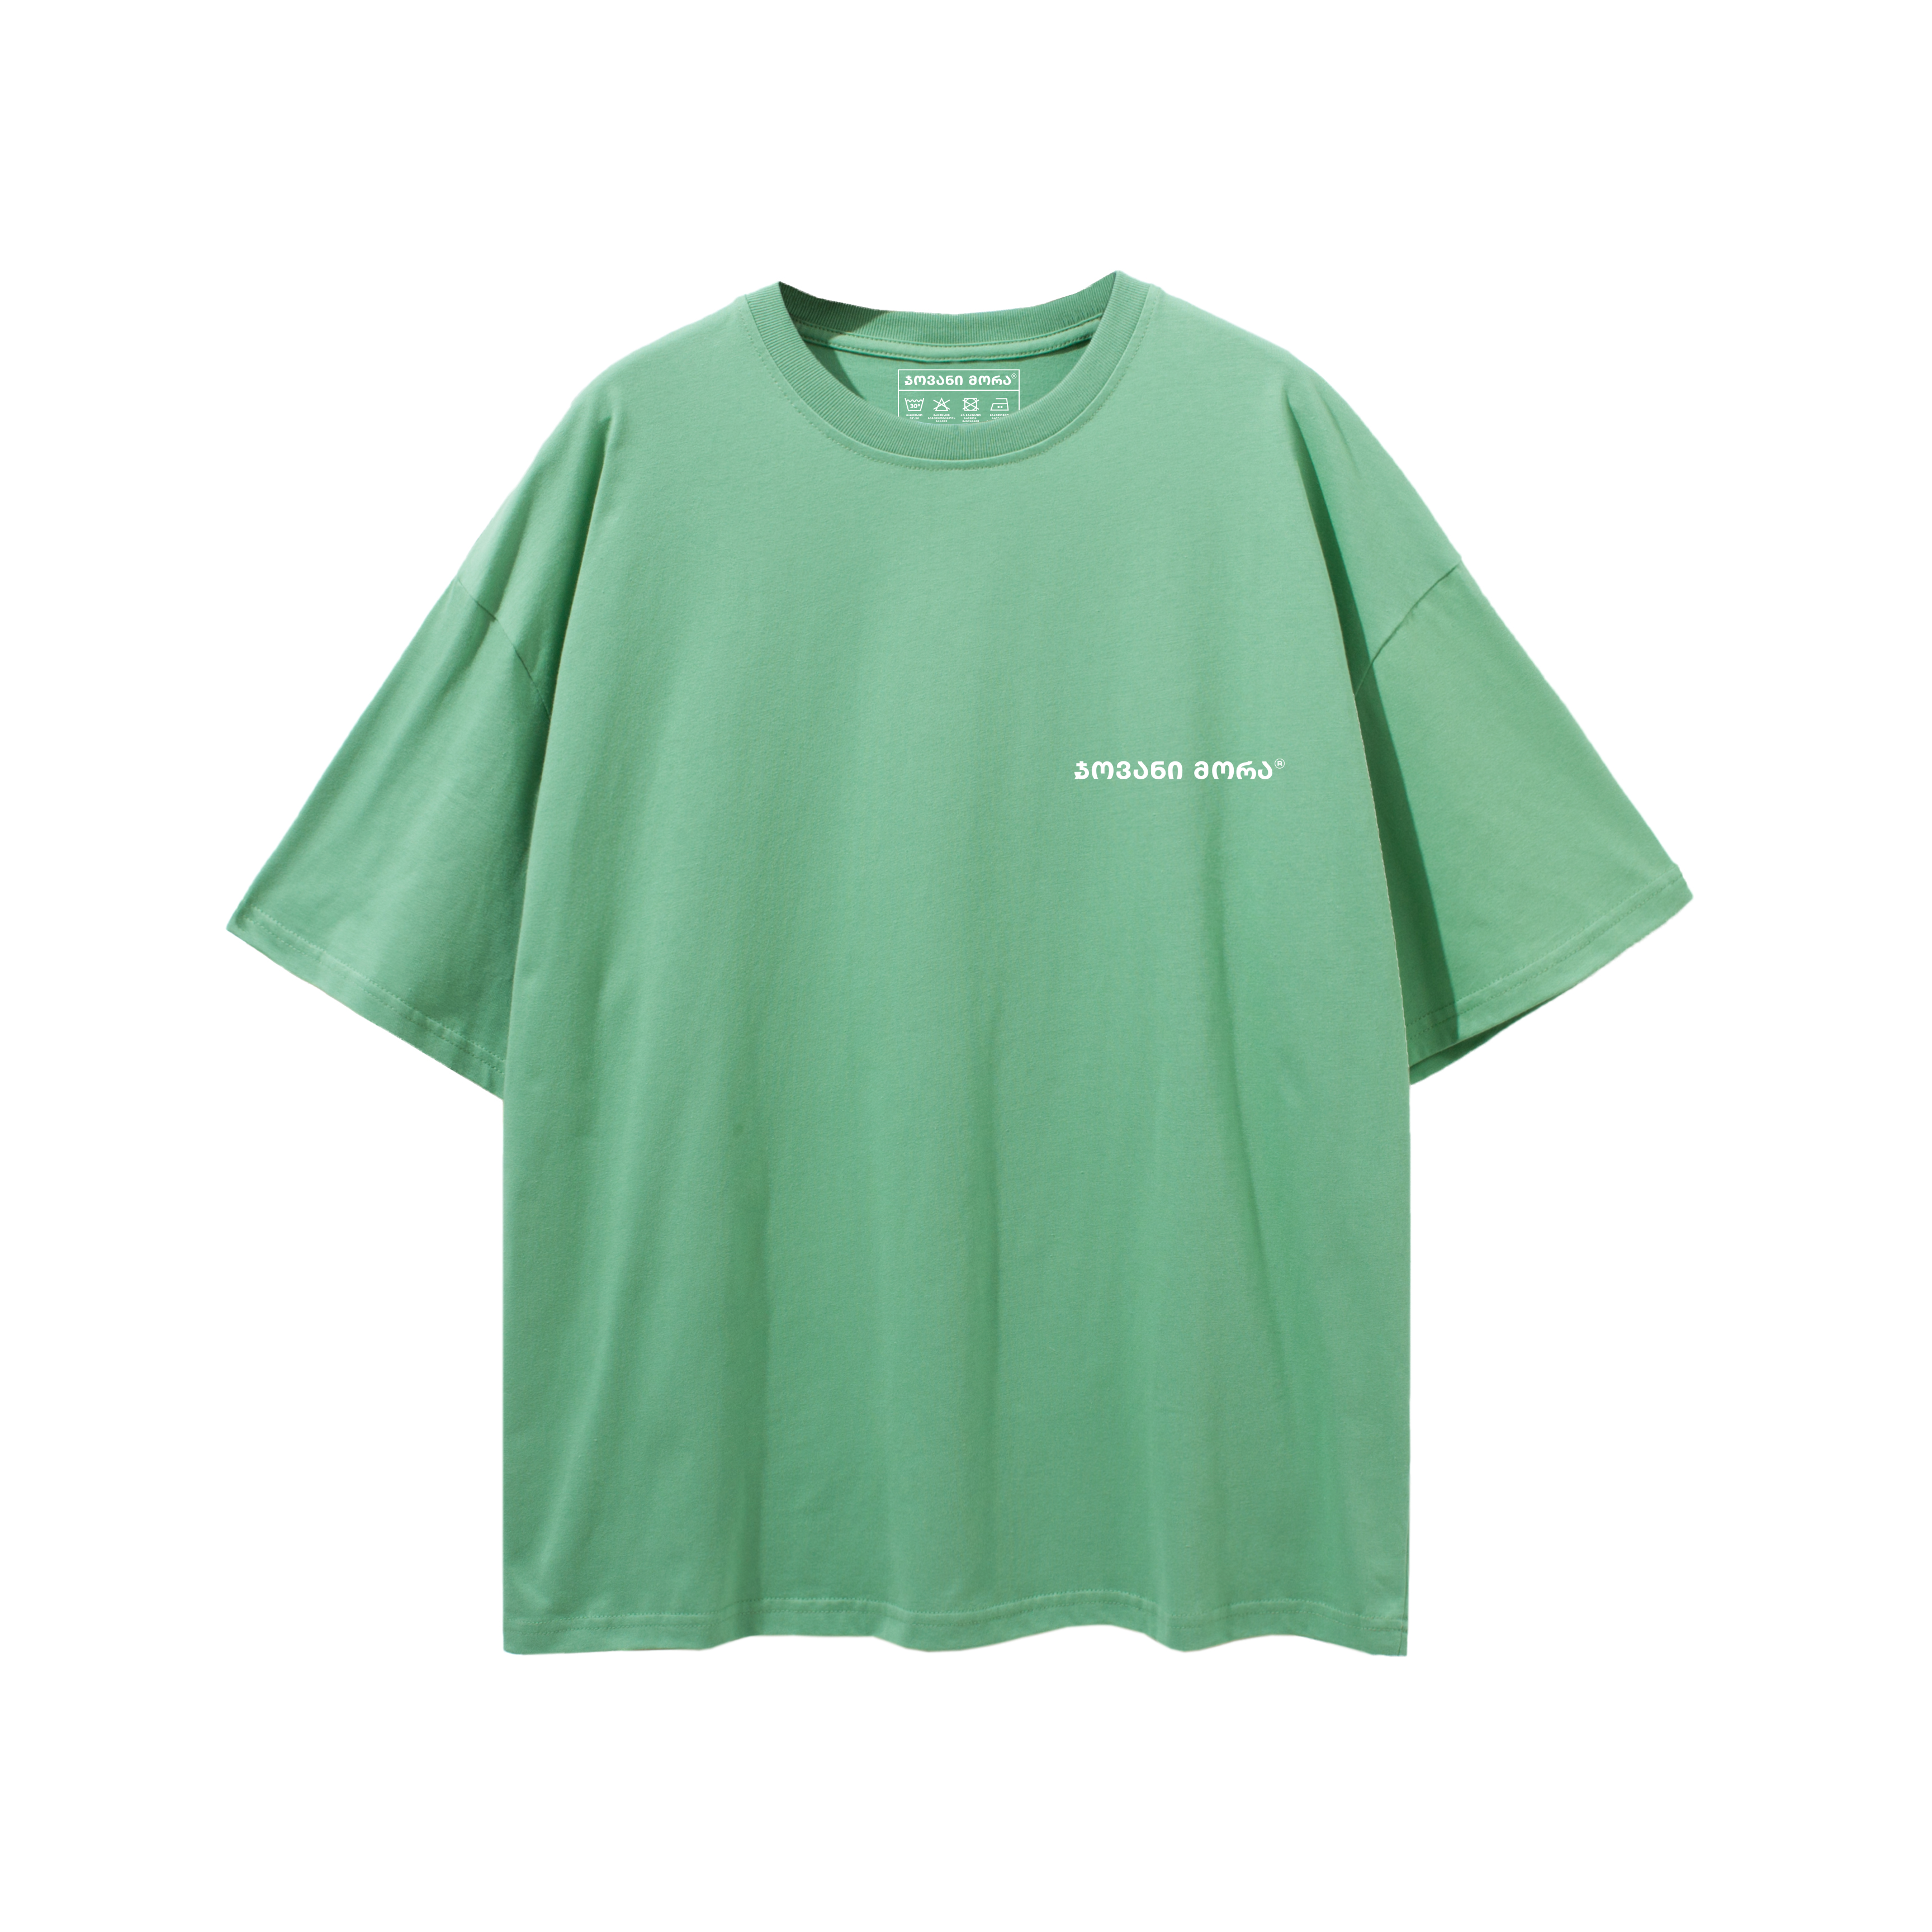 T-shirt (Green), Oversized Fit